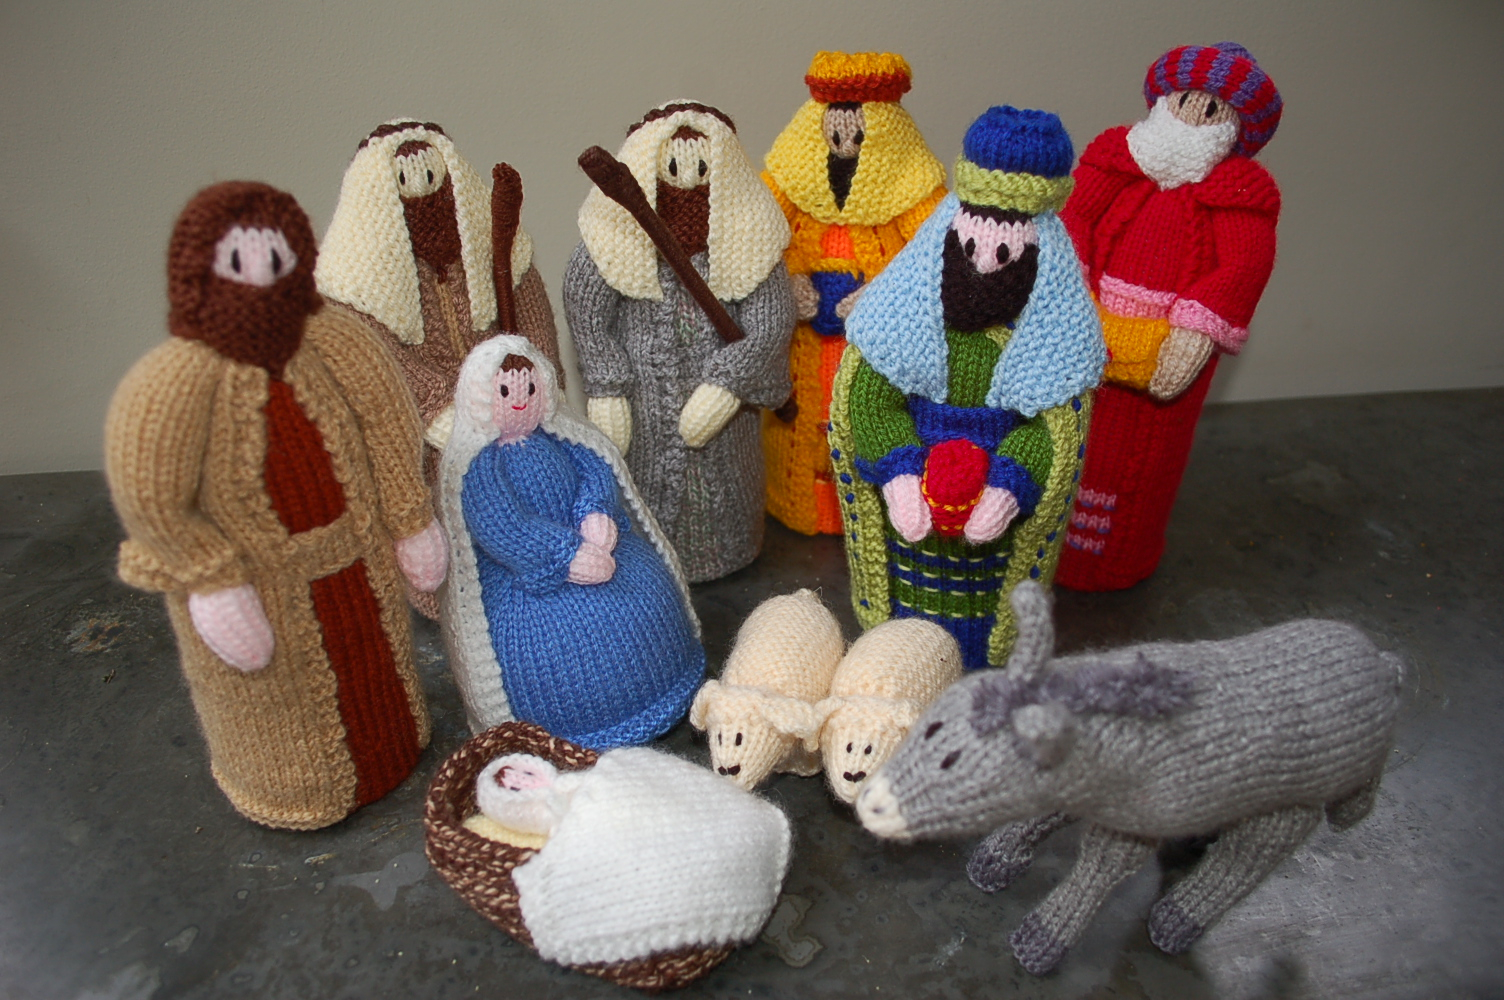 Nativity Knitting Pattern Free Christmas Trends The Knitted Nativity The Womens Room